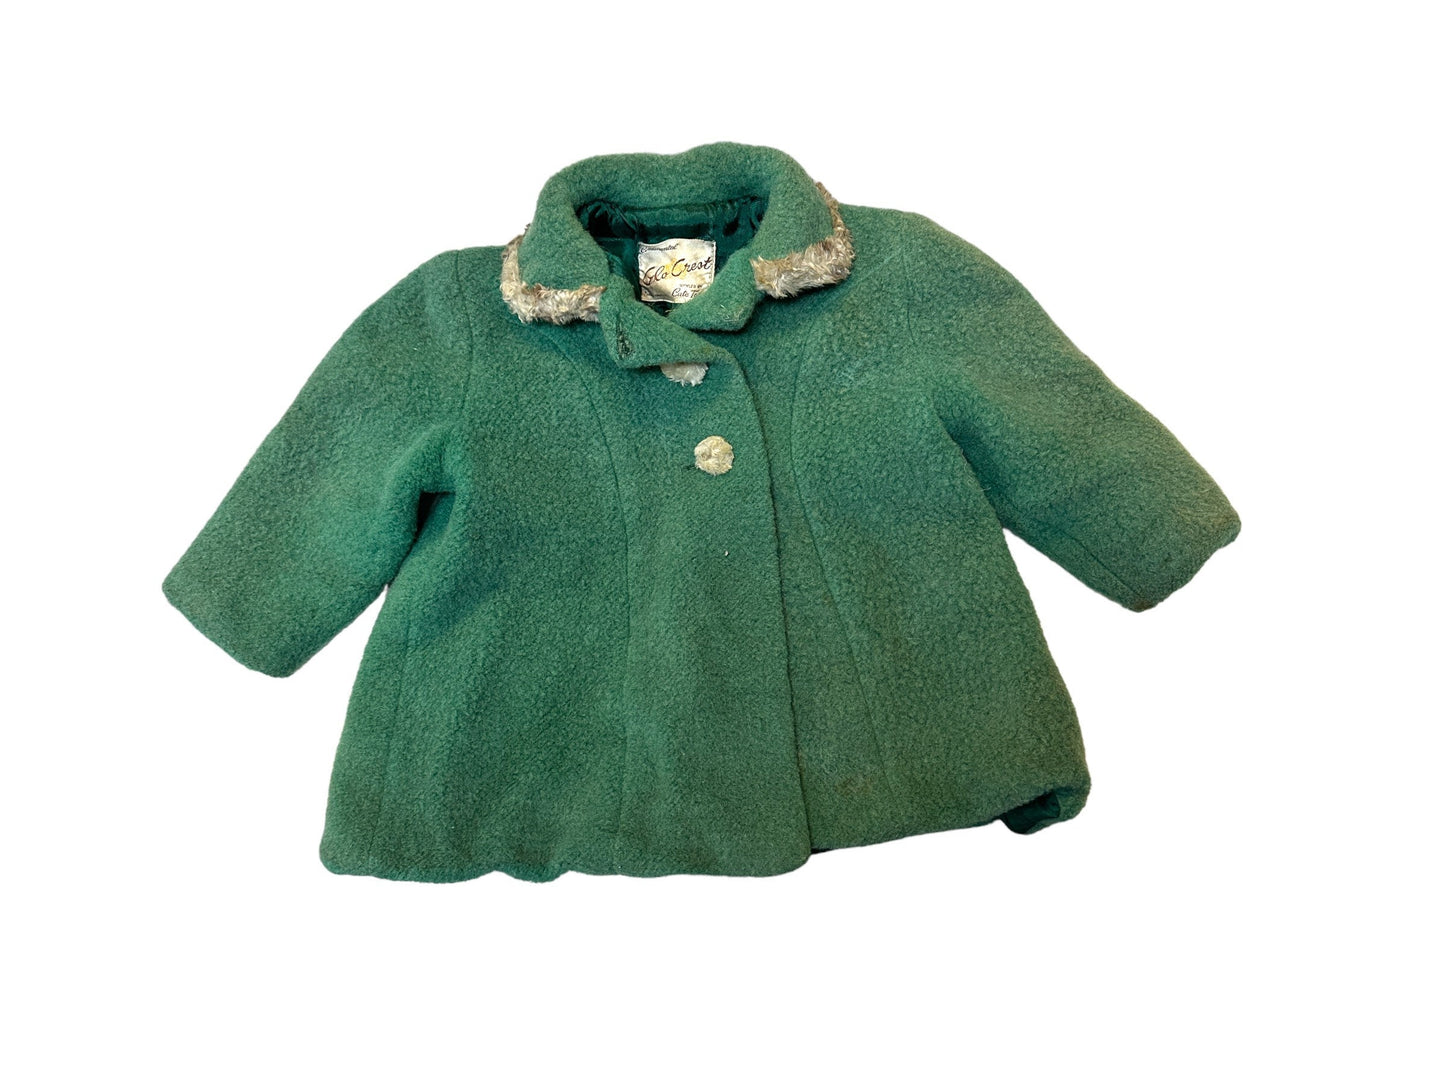 1950s wool jacket and overalls with bonnet Size approx 24 mos